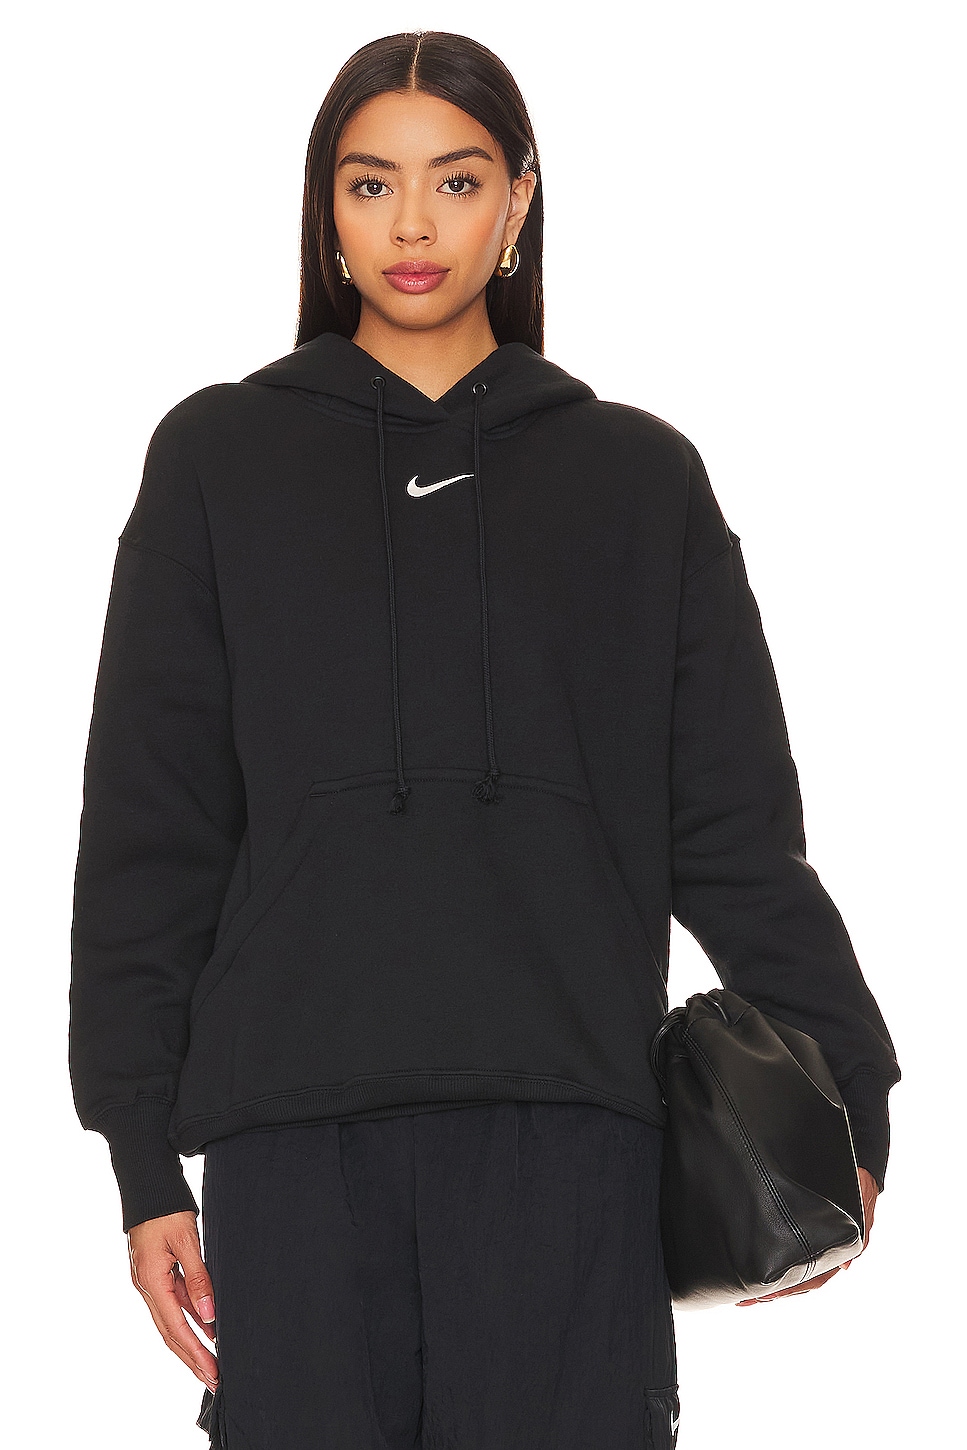 Using the Revolve 20% off one day sale to buy this Anine Bing hoodie.